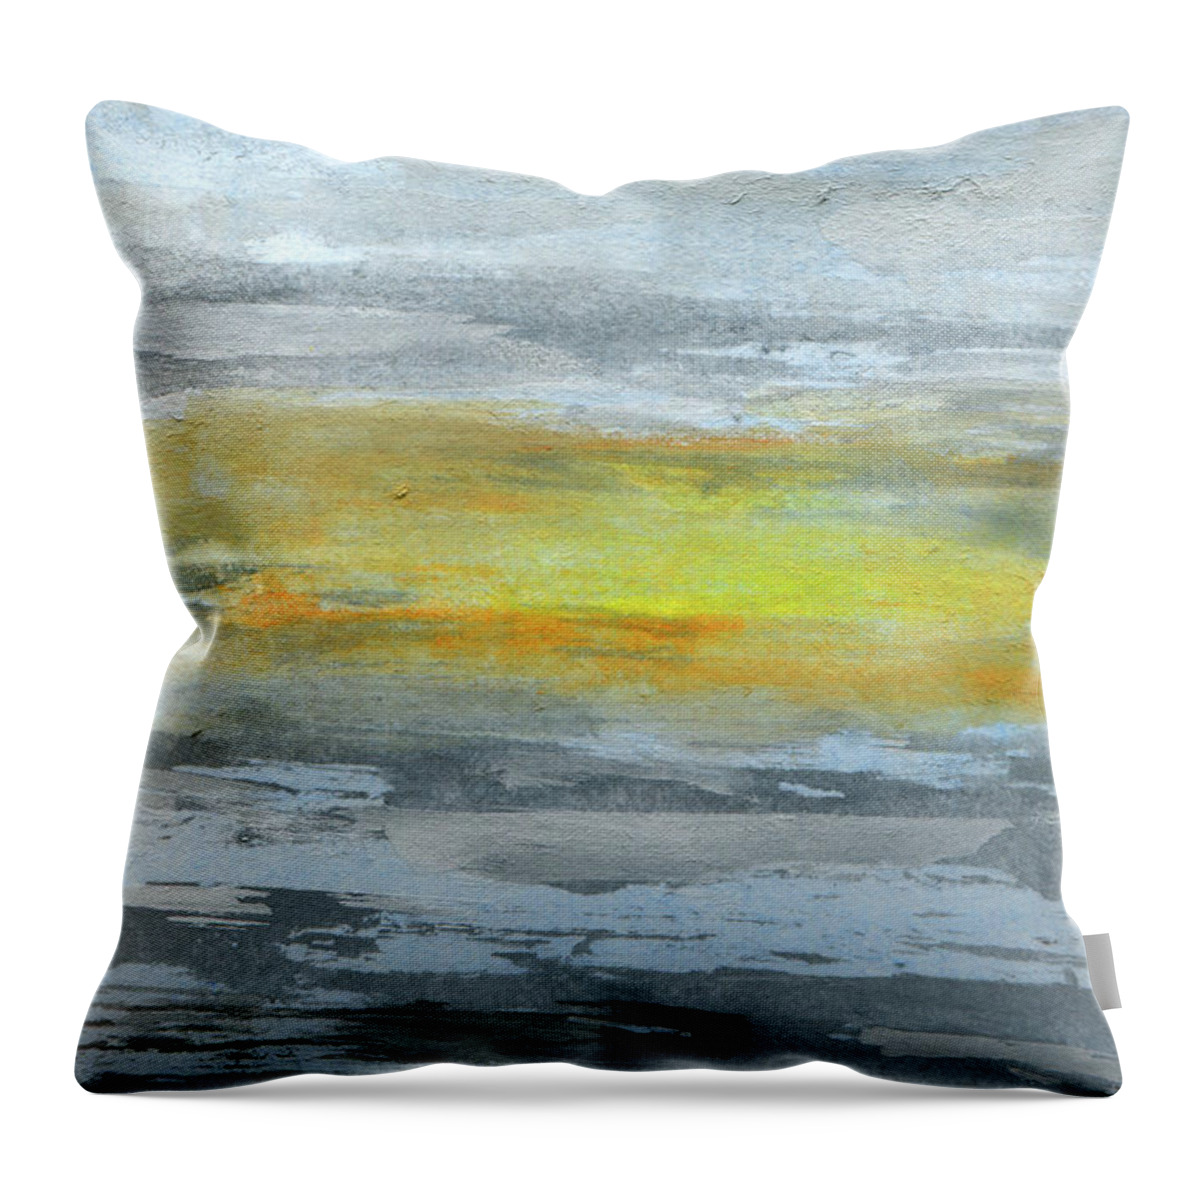 Optimism Best Good Light Pessimism Belief Faith Strength Source Hope Troubles Sun Overcoming Optimists Ominous Hopefulness Encouragement Confidence Cloudy Clouds Winter Weather Vast Triumph Through Threatening Sunset Stormy Storms Storm Sky Skies Shines Scene Prevail Positive Painterly Overcome Outlook Optimistic Onward Mood Inspiration Hopeful Goodness Feeling Expressive Evocative Dramatic Day Dark Contemporary Brightly Blue Black Kyllo Art Abstract Throw Pillow featuring the painting The Light Beyond by R Kyllo